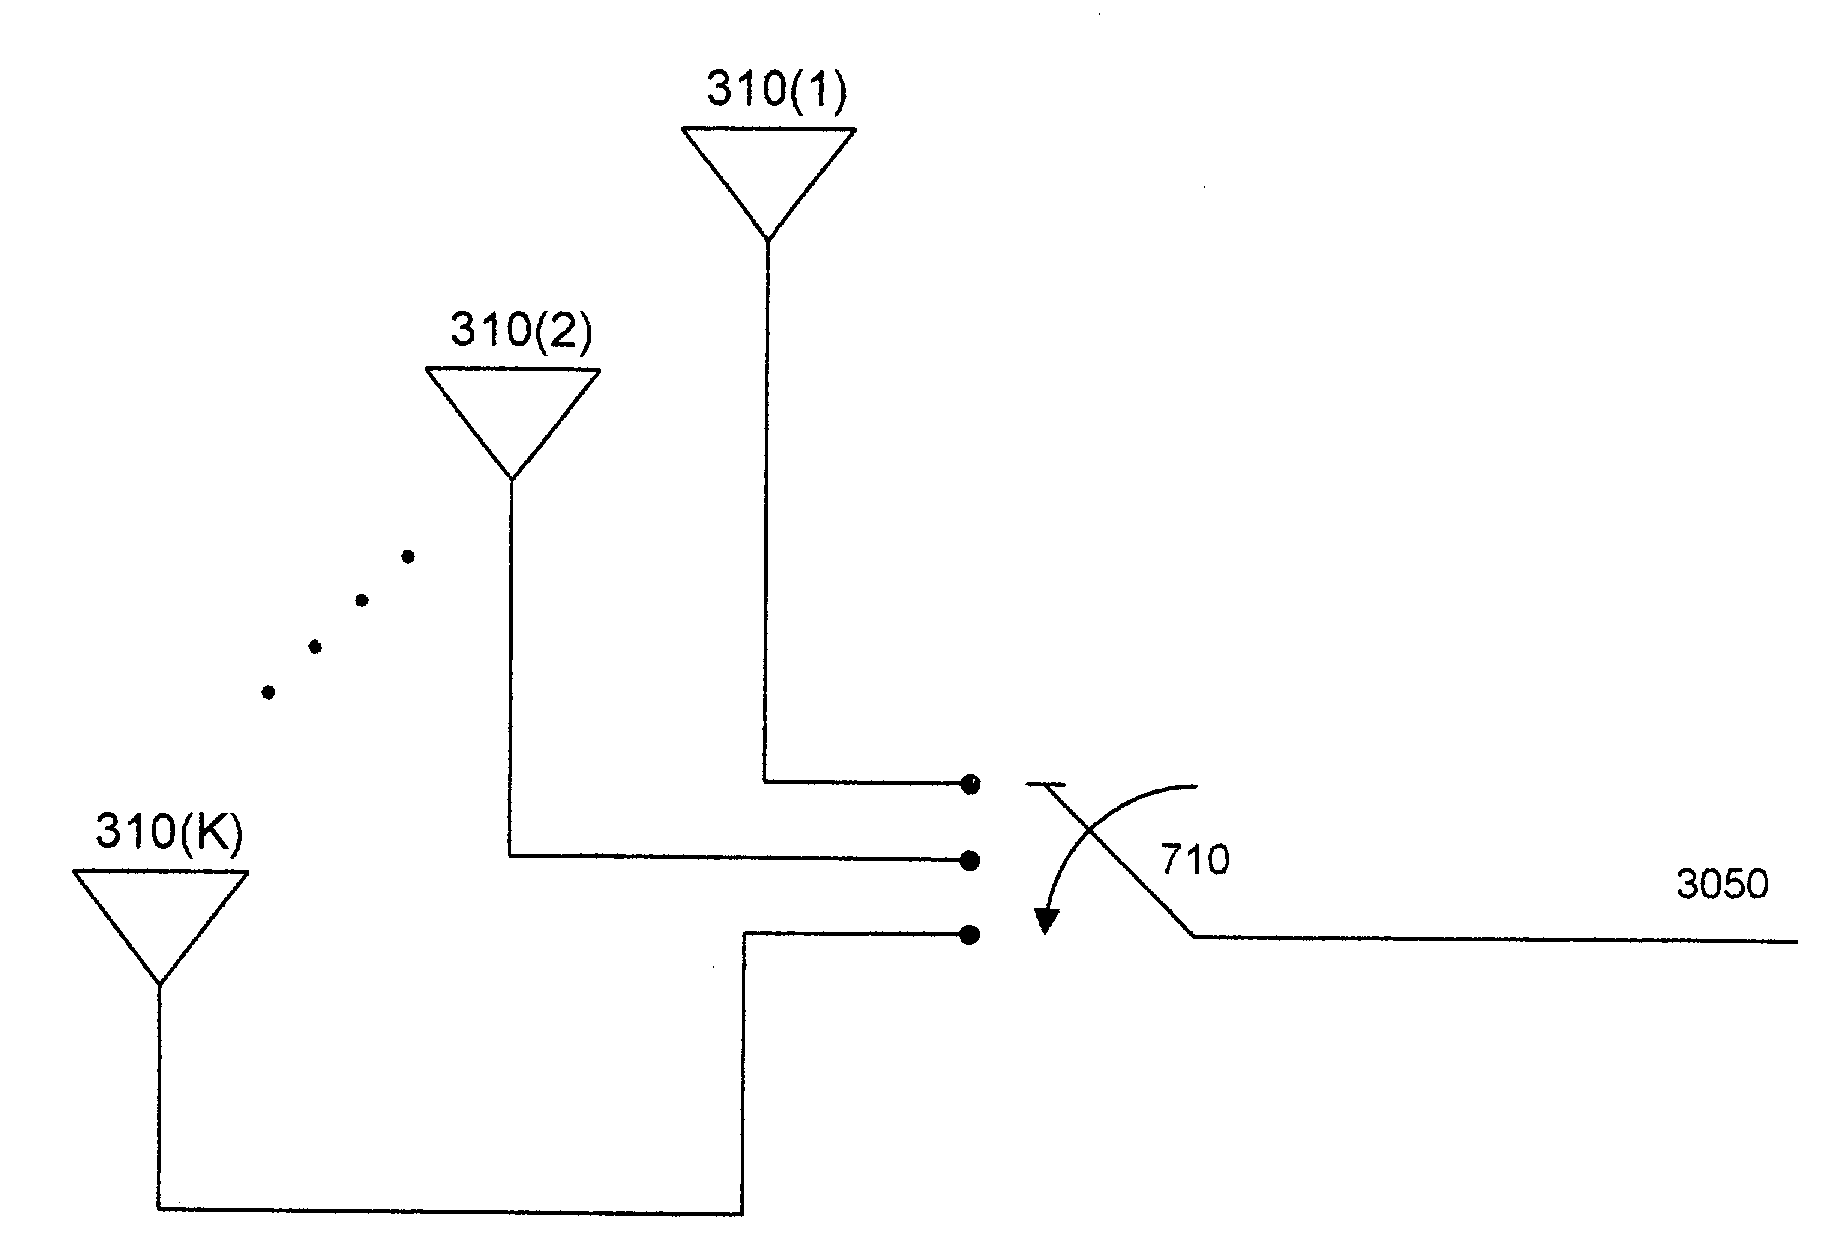 Selecting a set of antennas for use in a wireless communication system